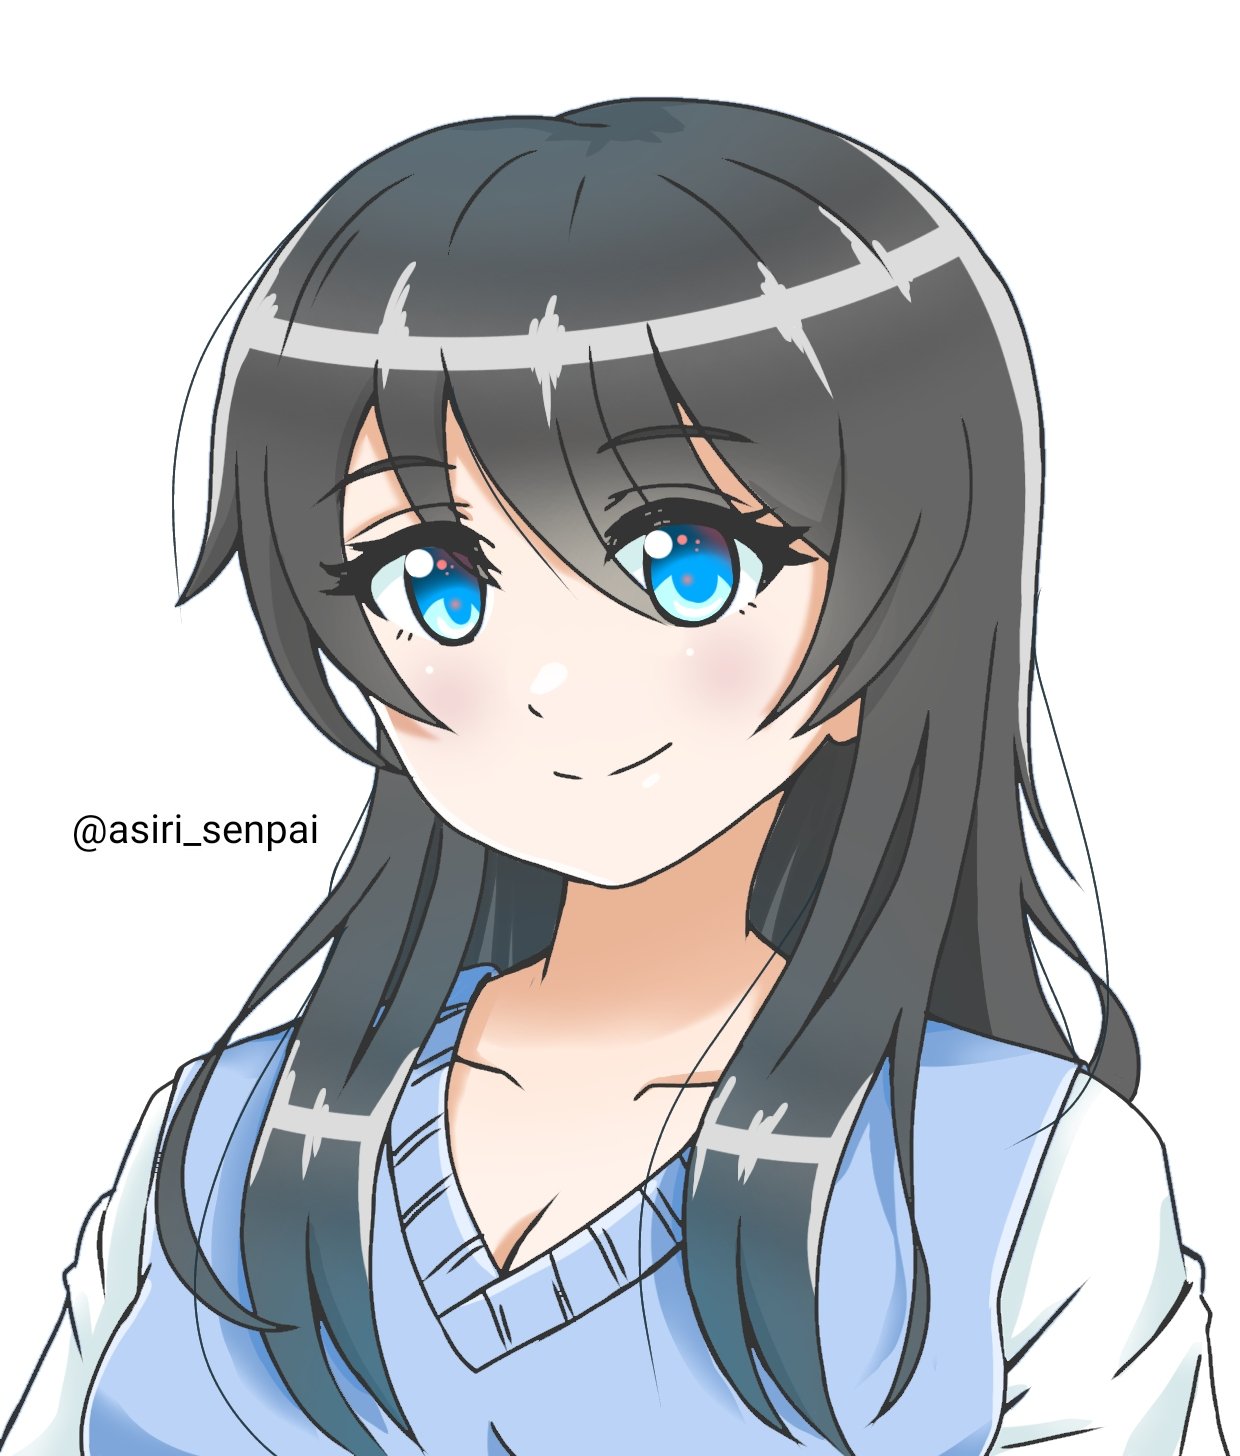 Do any digital drawing or emote in an anime style by Shinypaints  Fiverr